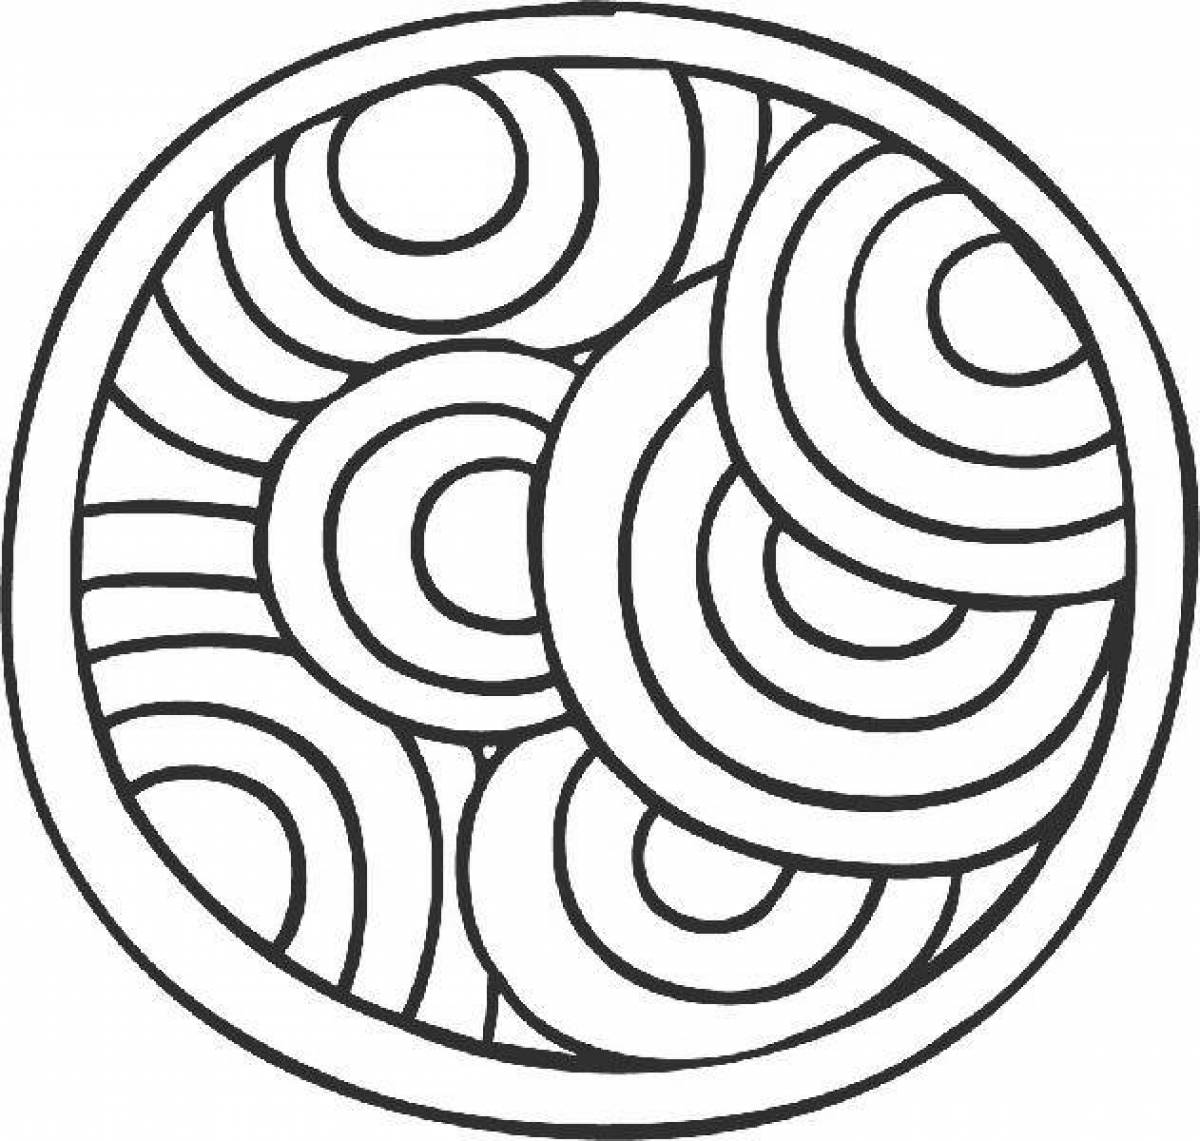 Creative spiral create coloring page